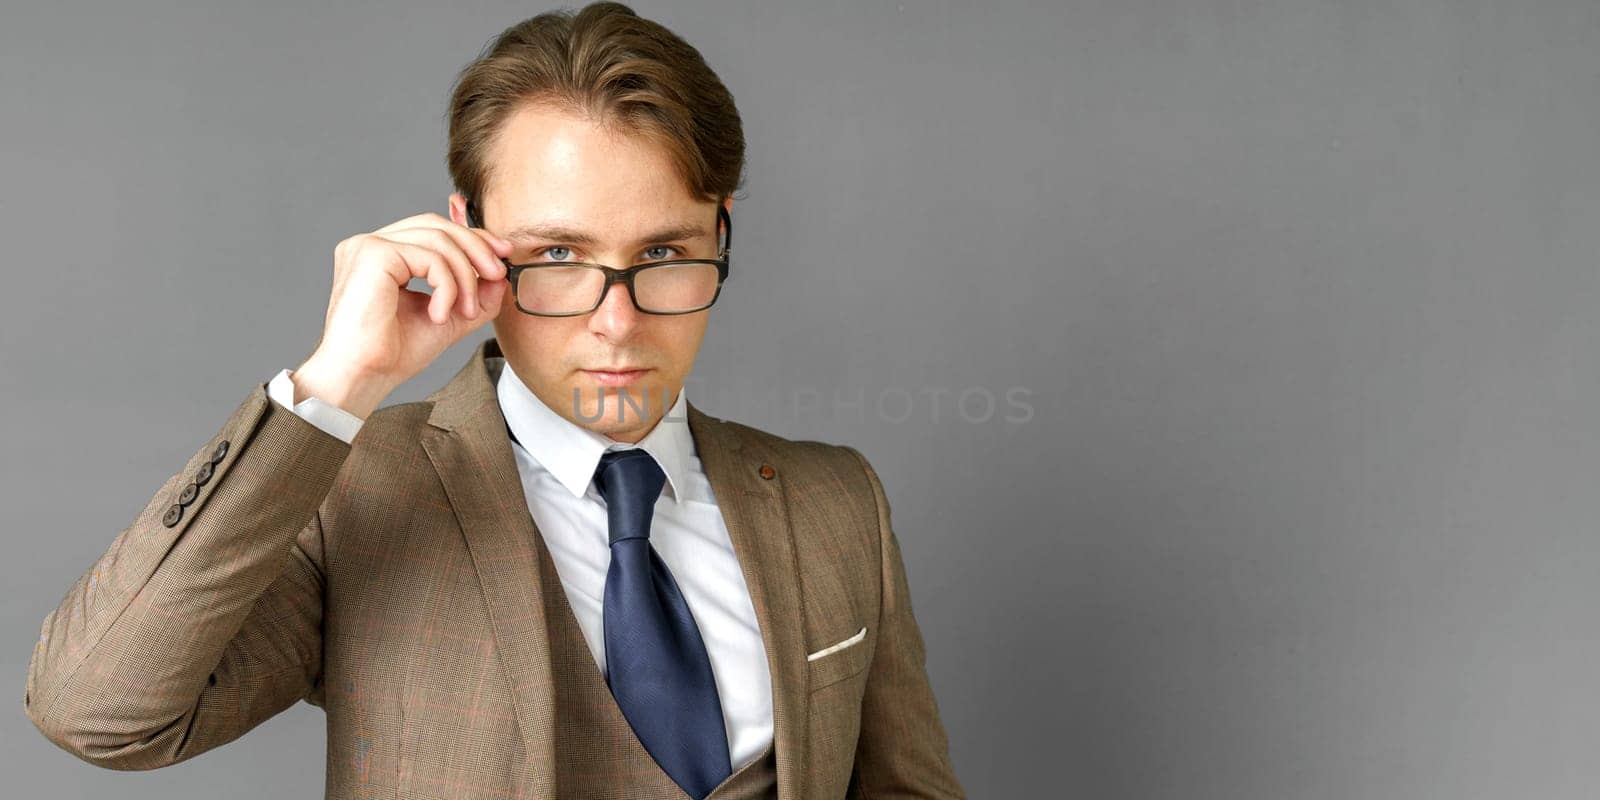 Portrait of a businessman in a suit looking at the camera and adjusting his glasses. Gray background. by Sd28DimoN_1976